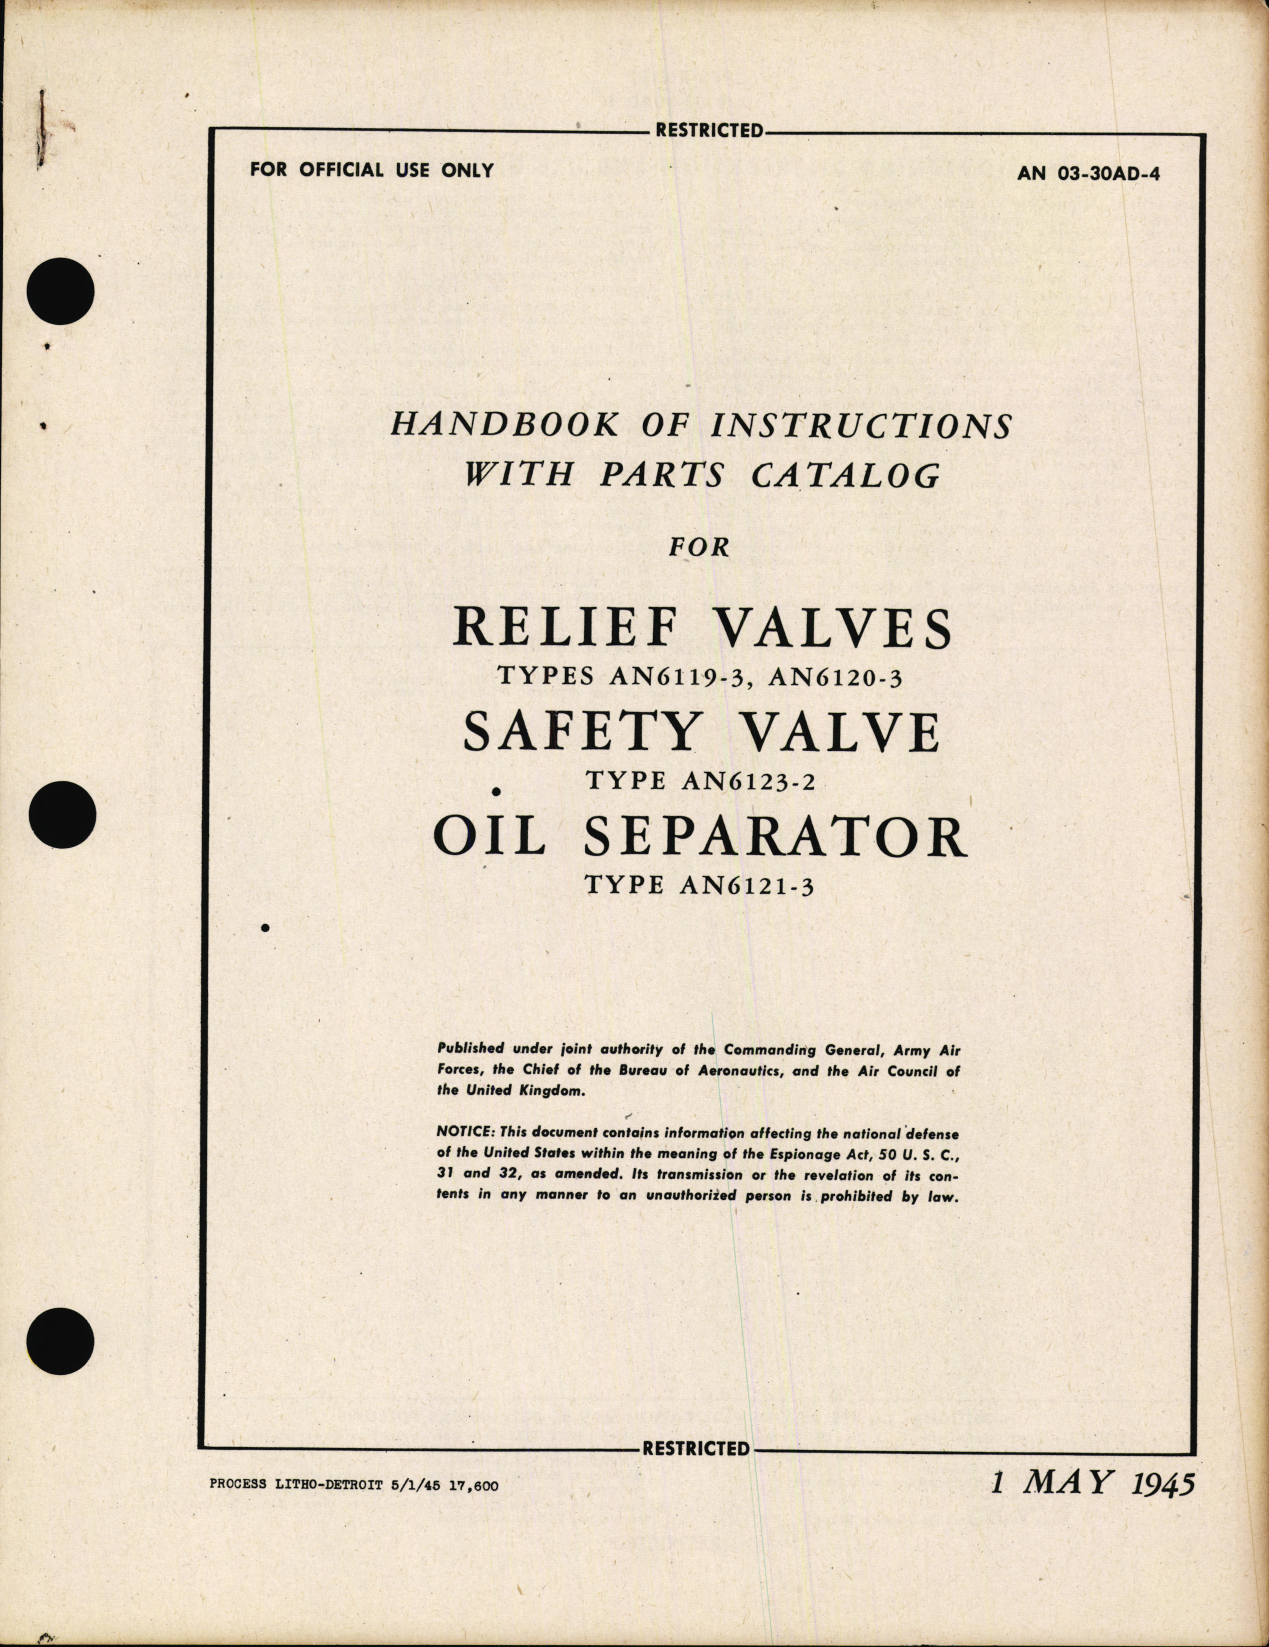 Sample page 1 from AirCorps Library document: Handbook of Instructions with Parts Catalog for Relief Valves, Safety Valve, and Oil Separator